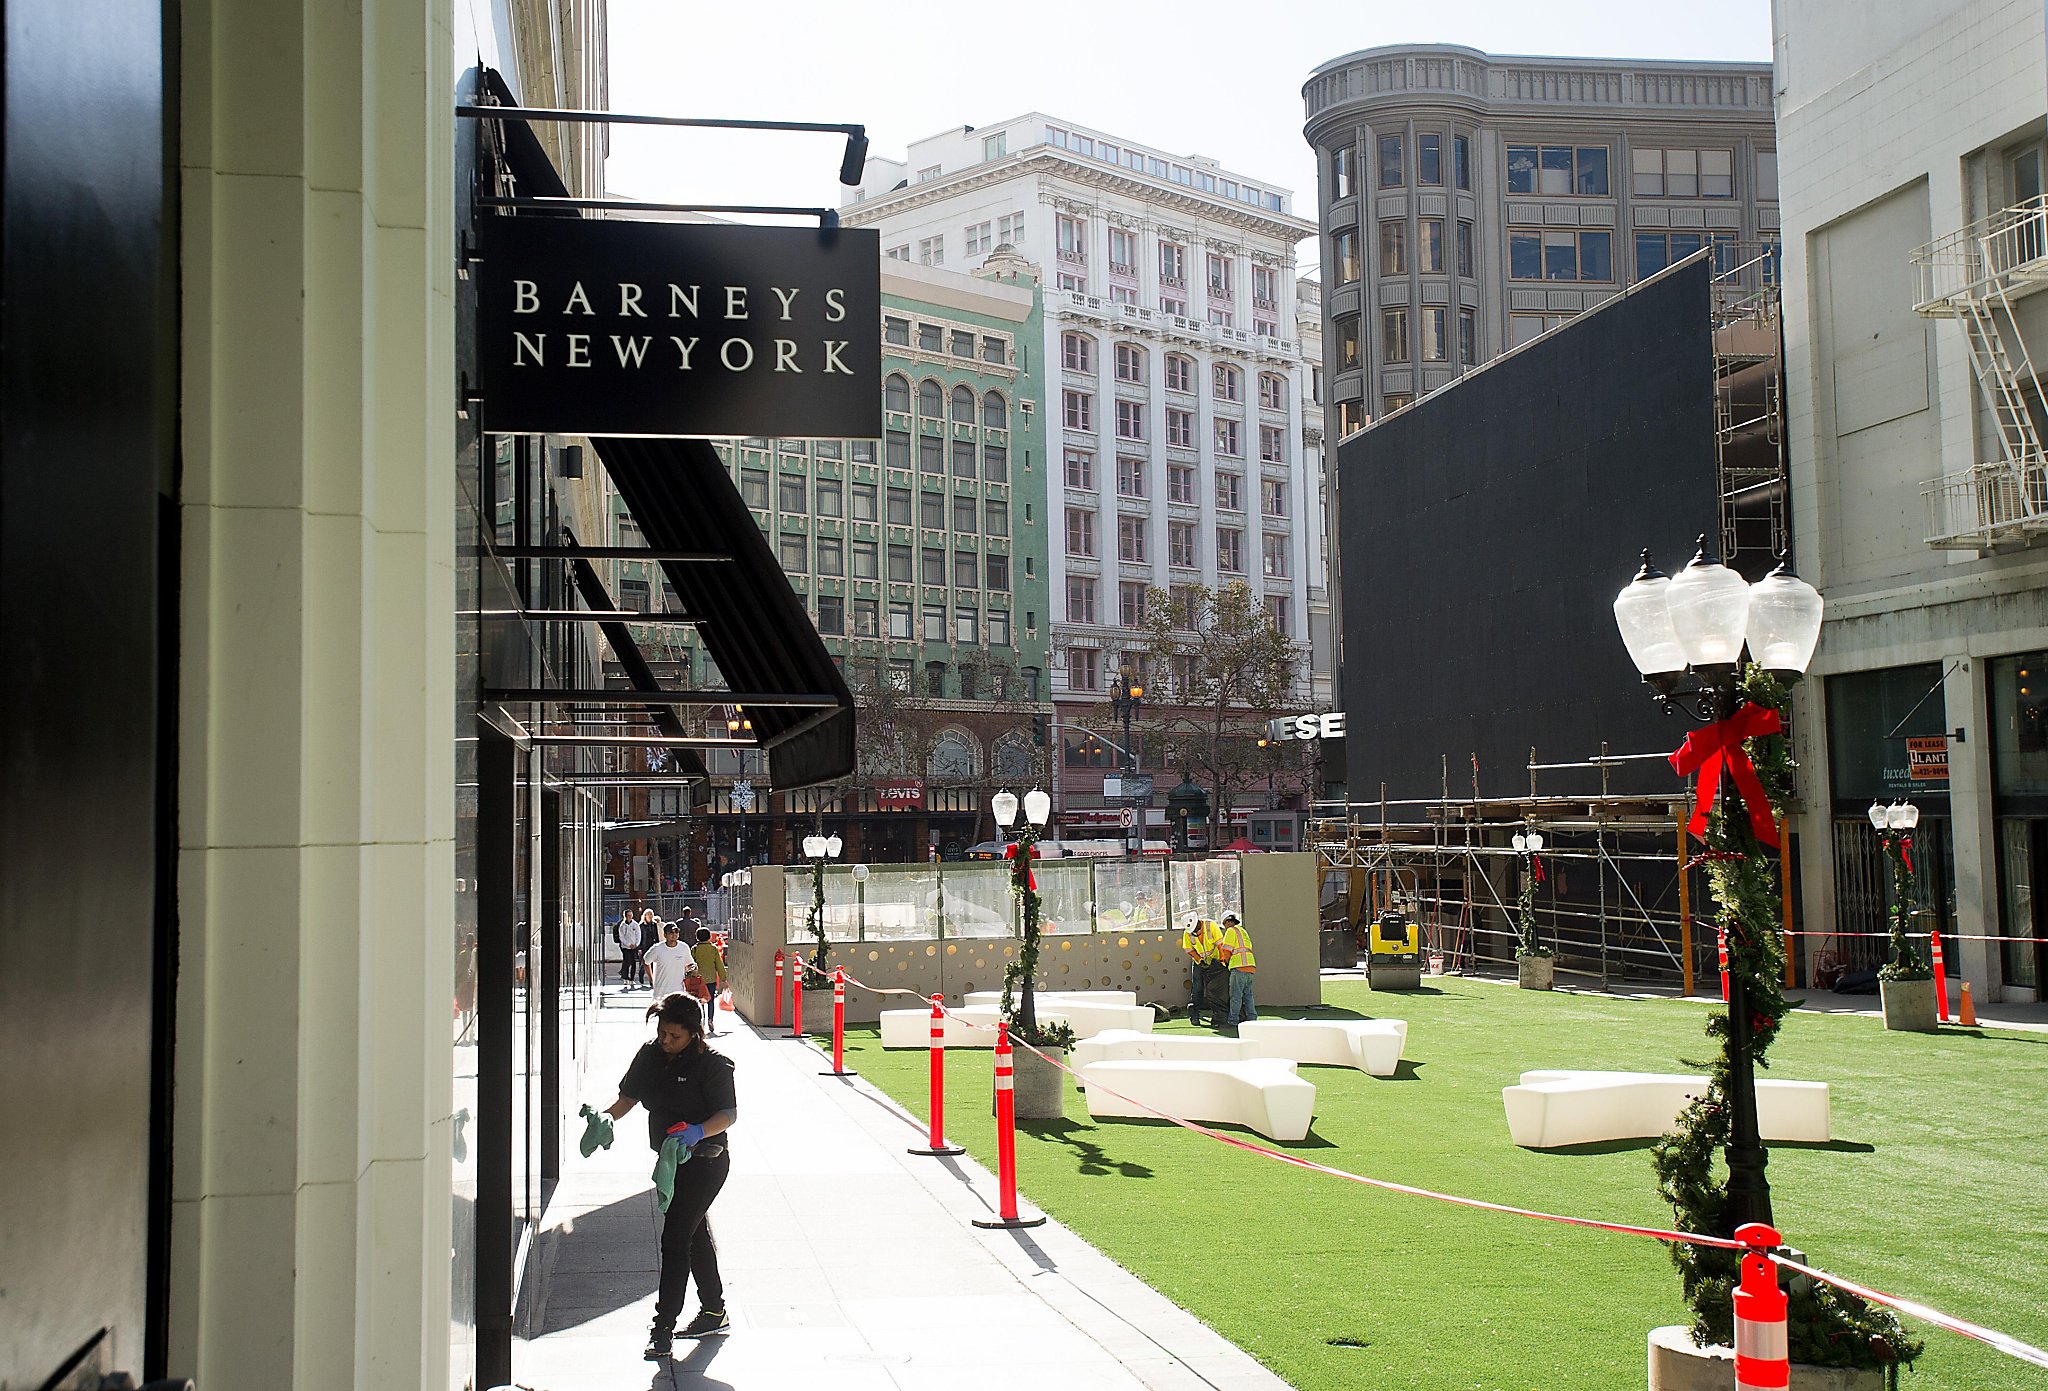 Barneys New York Could Close All Stores in New Deal: Flagship Tour